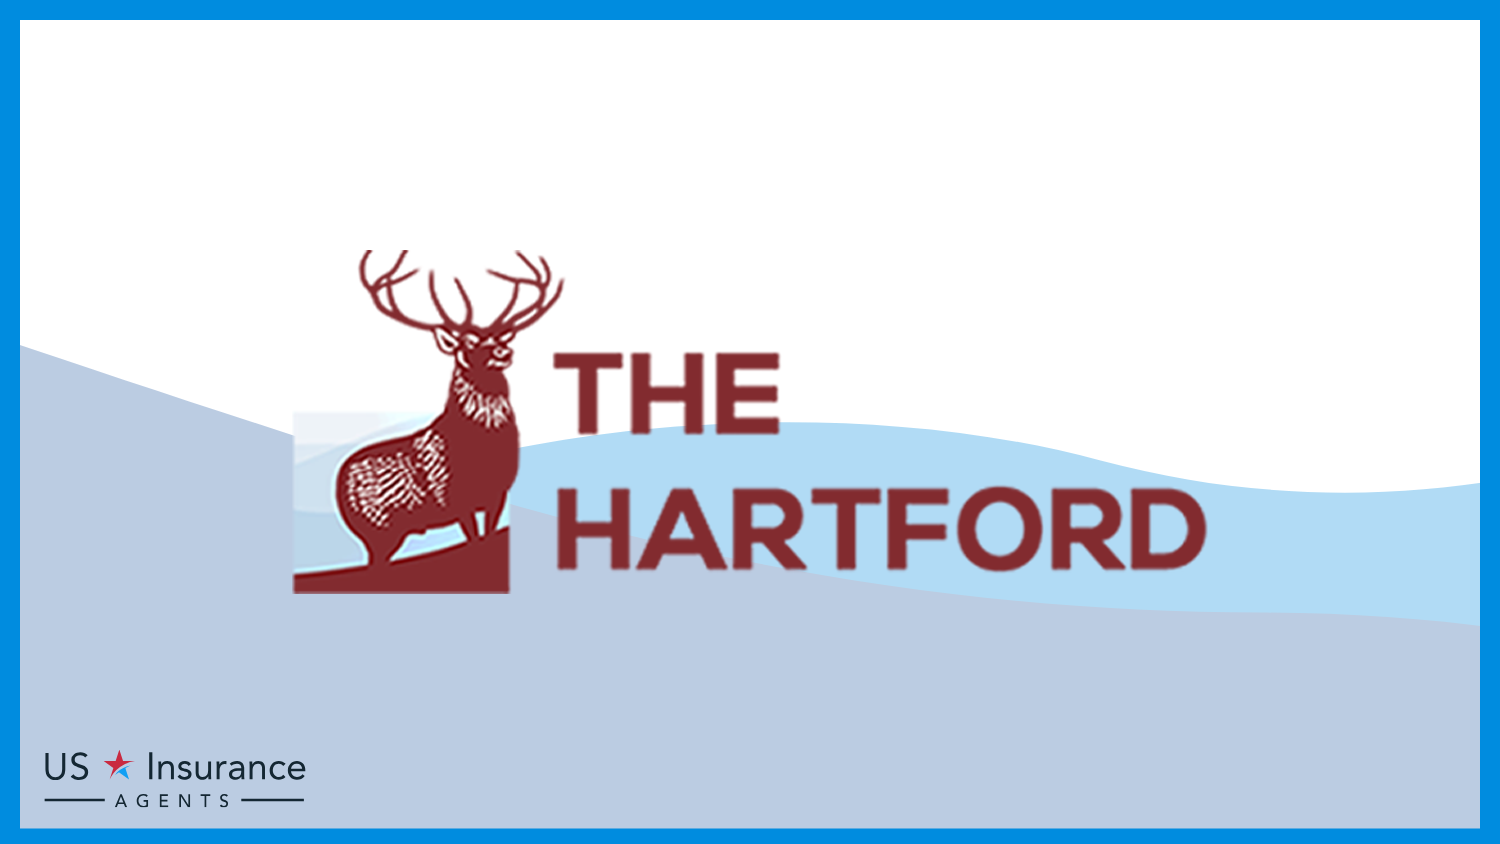 The Hartford: Best Business Insurance for Concierge Services